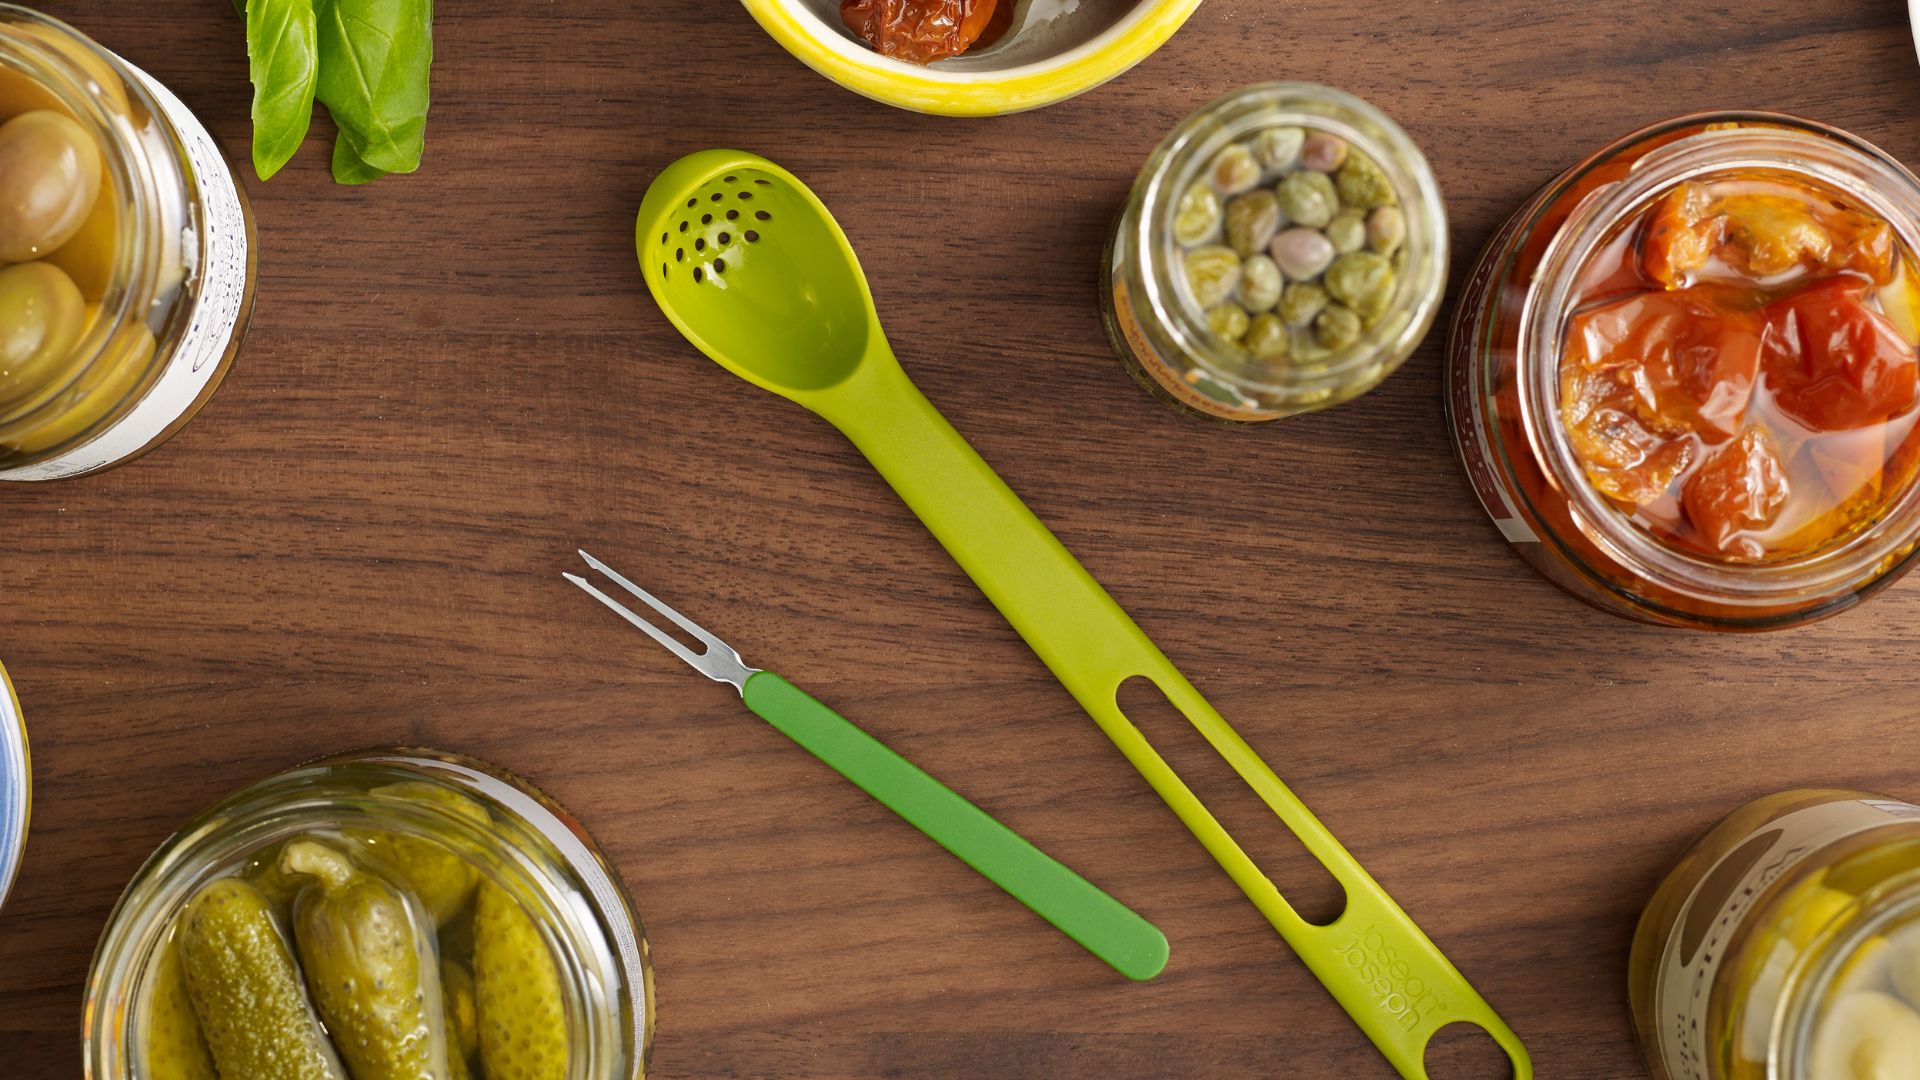 10 Must-Have Kitchen Gadgets For Your Home